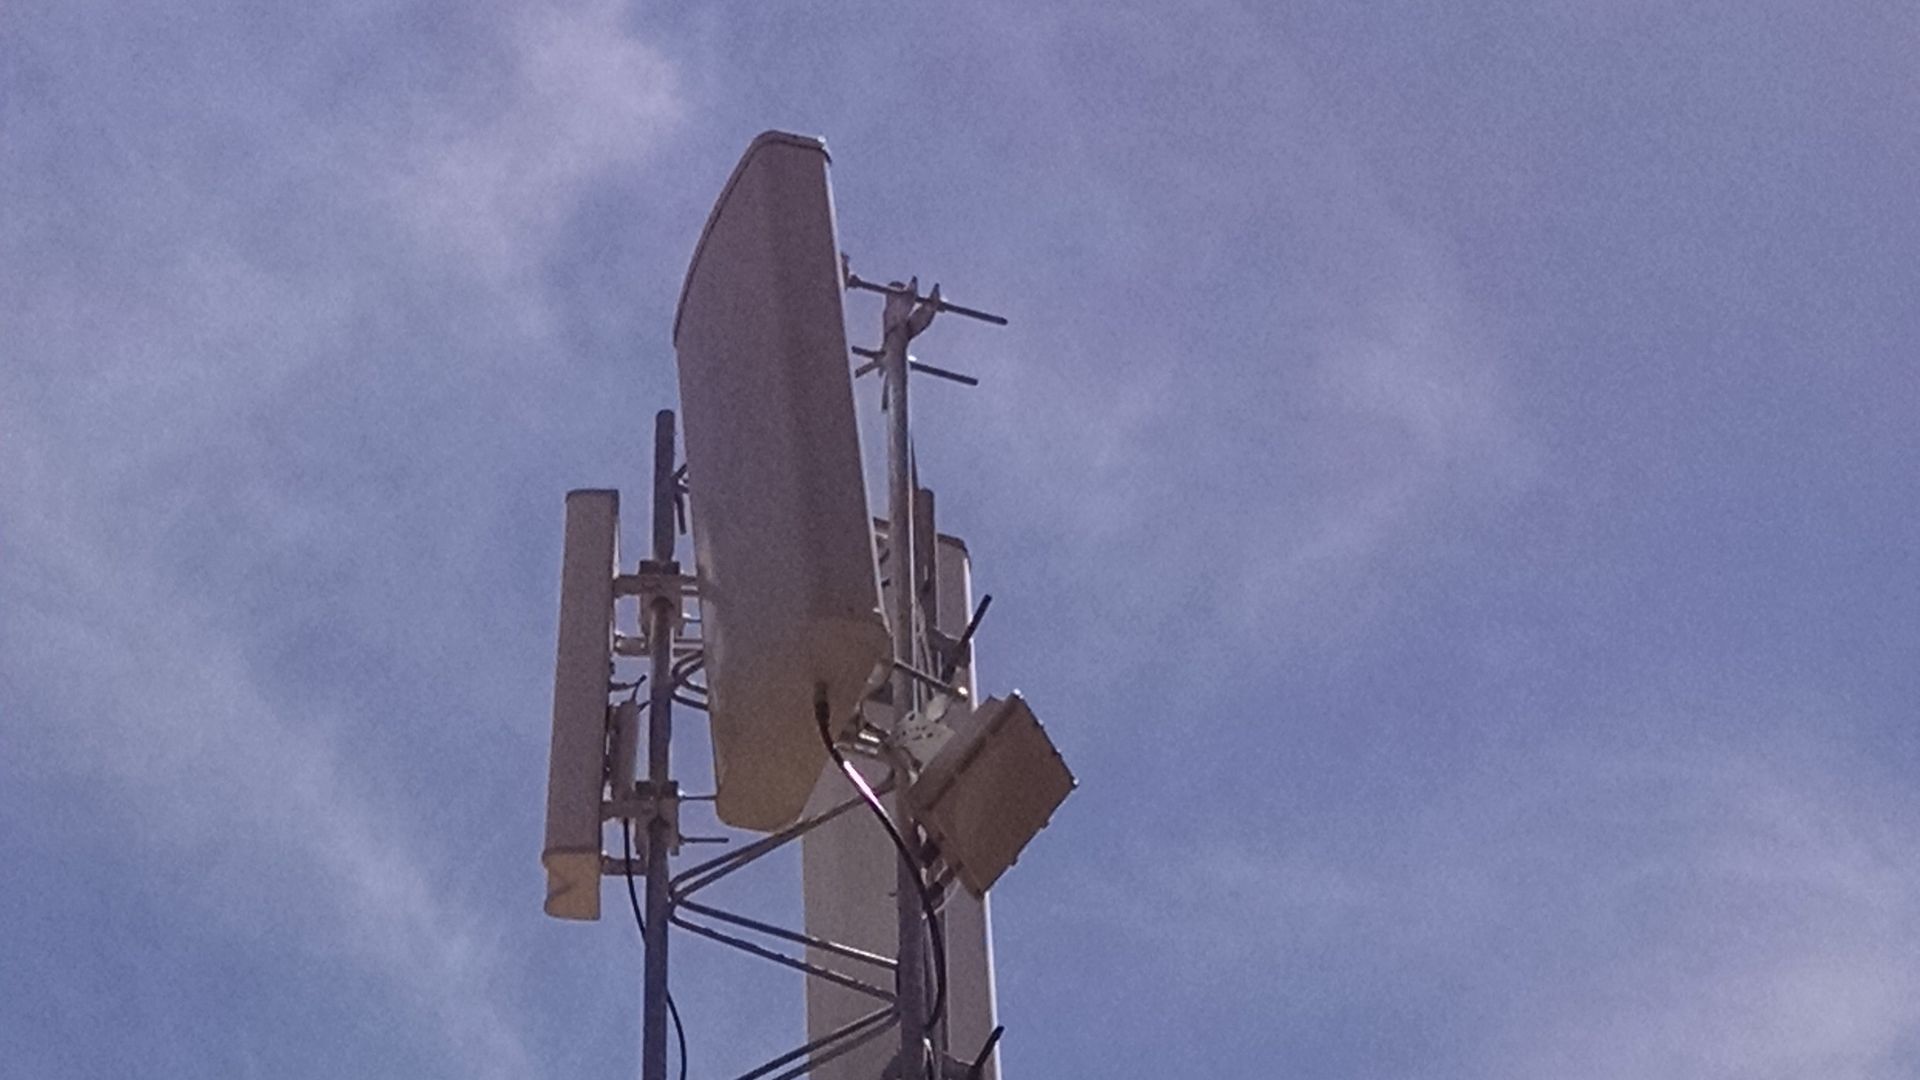 An antenna setup for delivering Internet service to rural areas using TV white spaces.